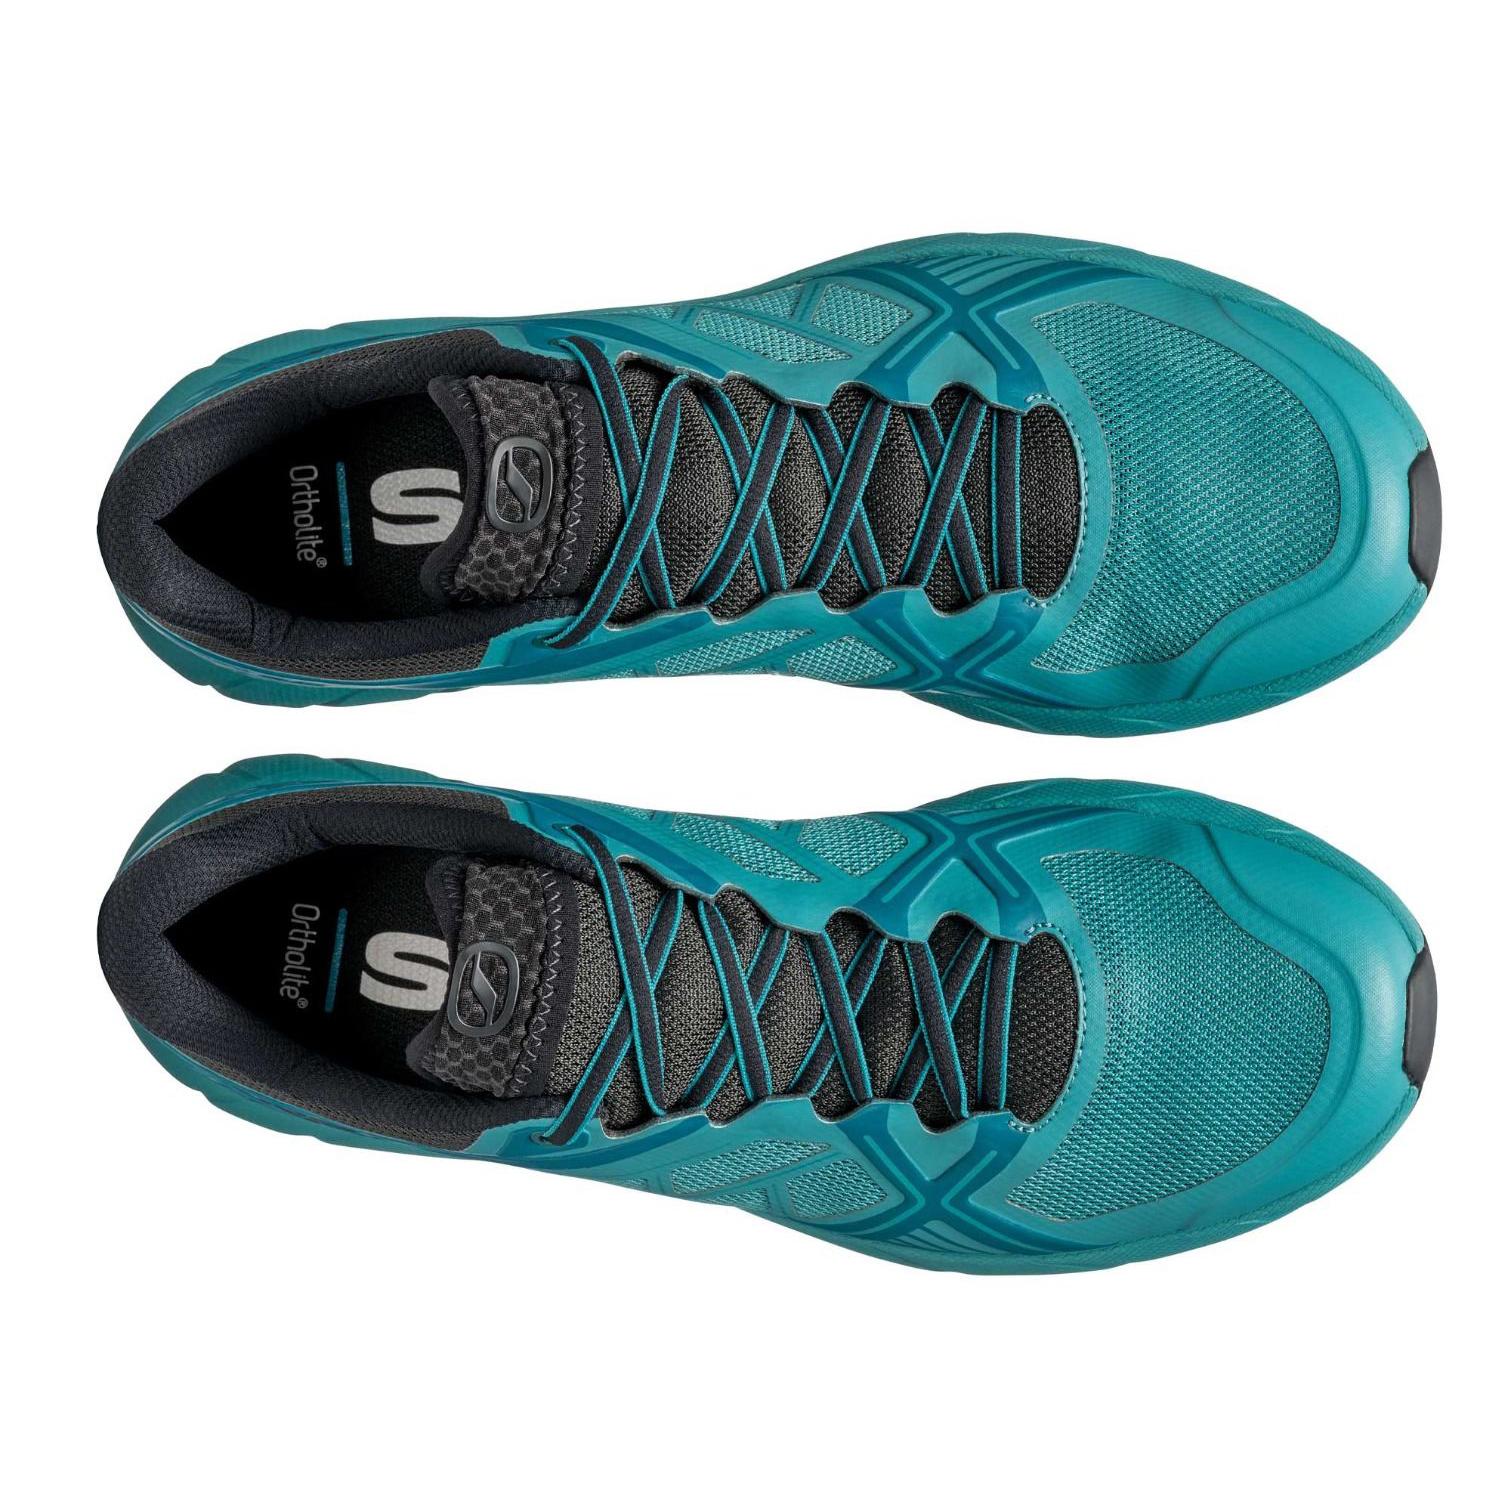 Sapatilhas Trail Running SCARPA Spin 2.0 Masculino Turquoise/Black | Portugal-79309